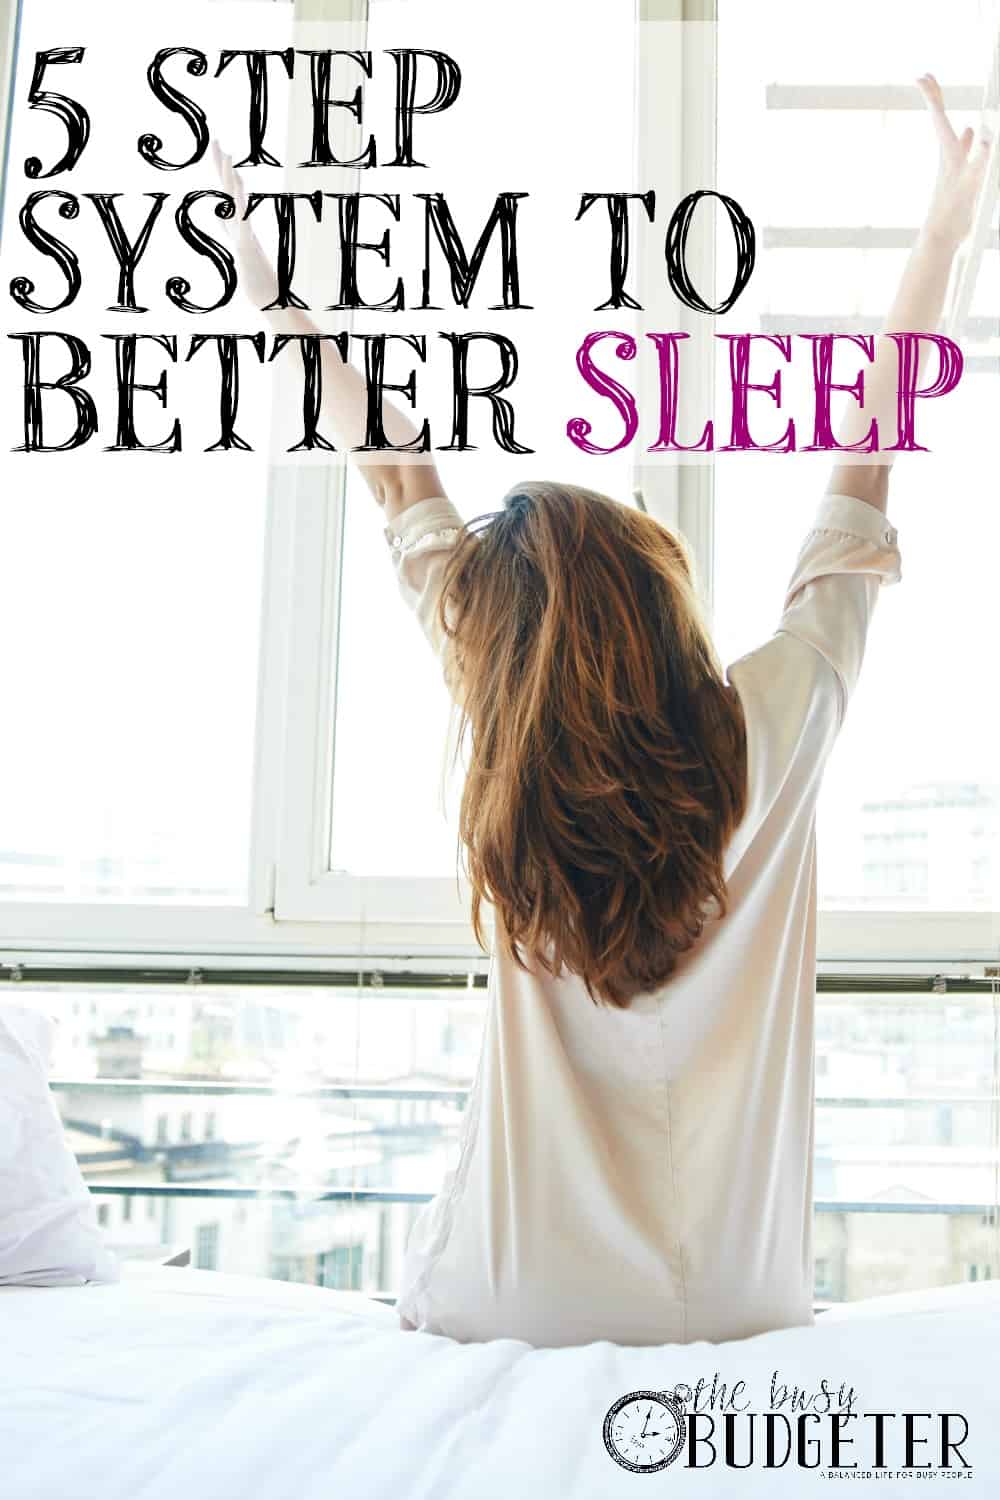 The 5 Step System to Better Sleep for Busy People. - The Busy Budgeter